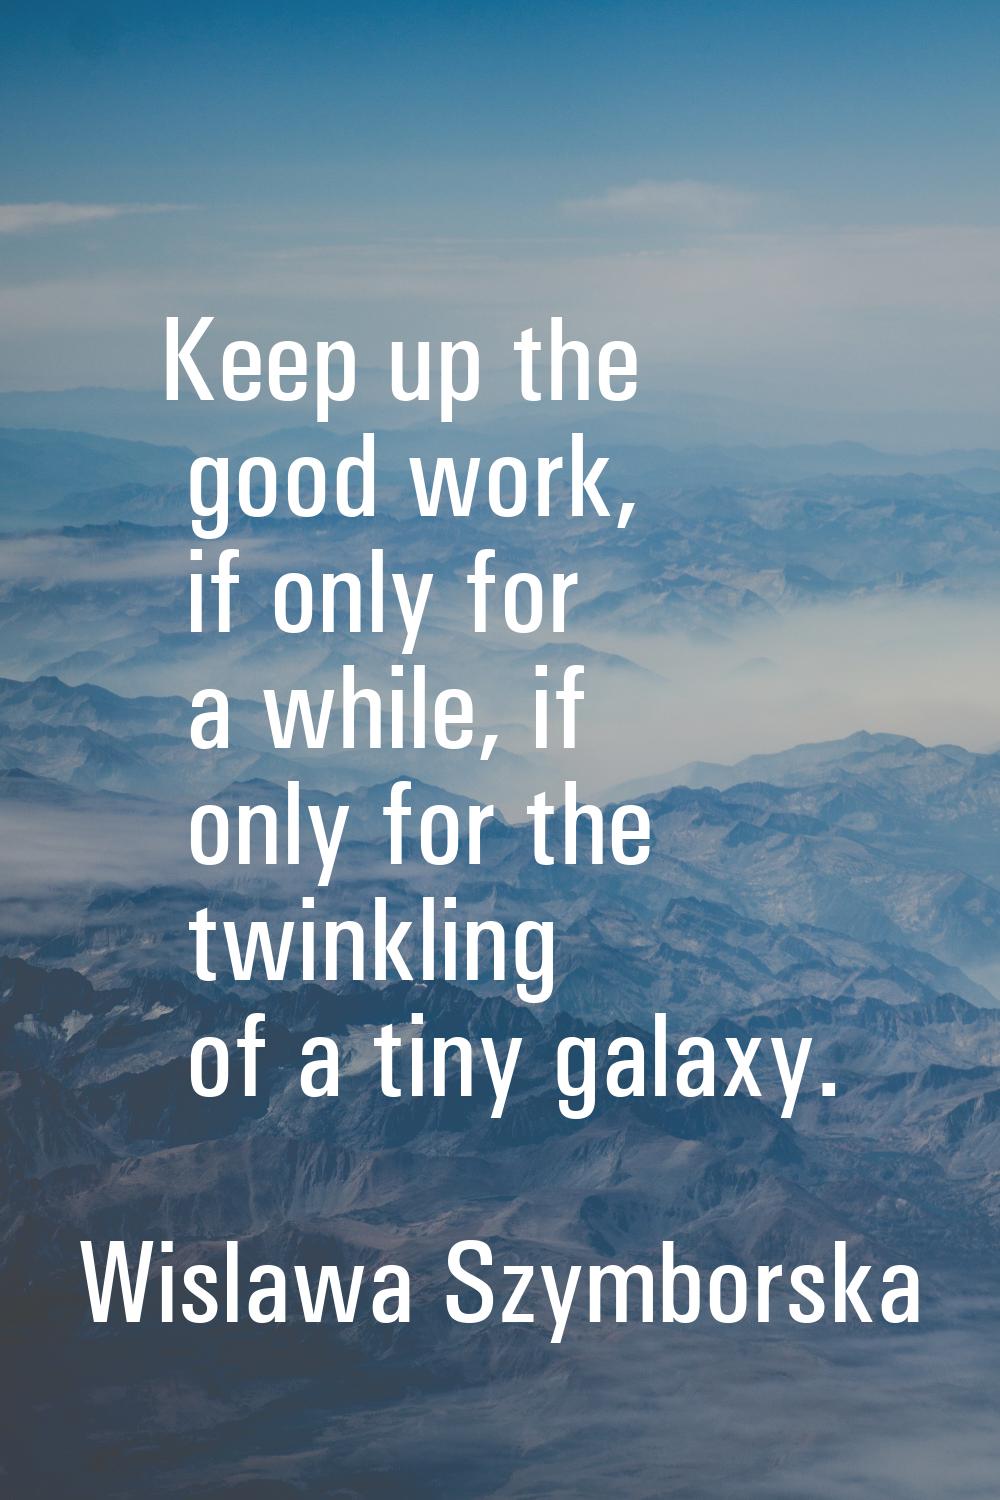 Keep up the good work, if only for a while, if only for the twinkling of a tiny galaxy.